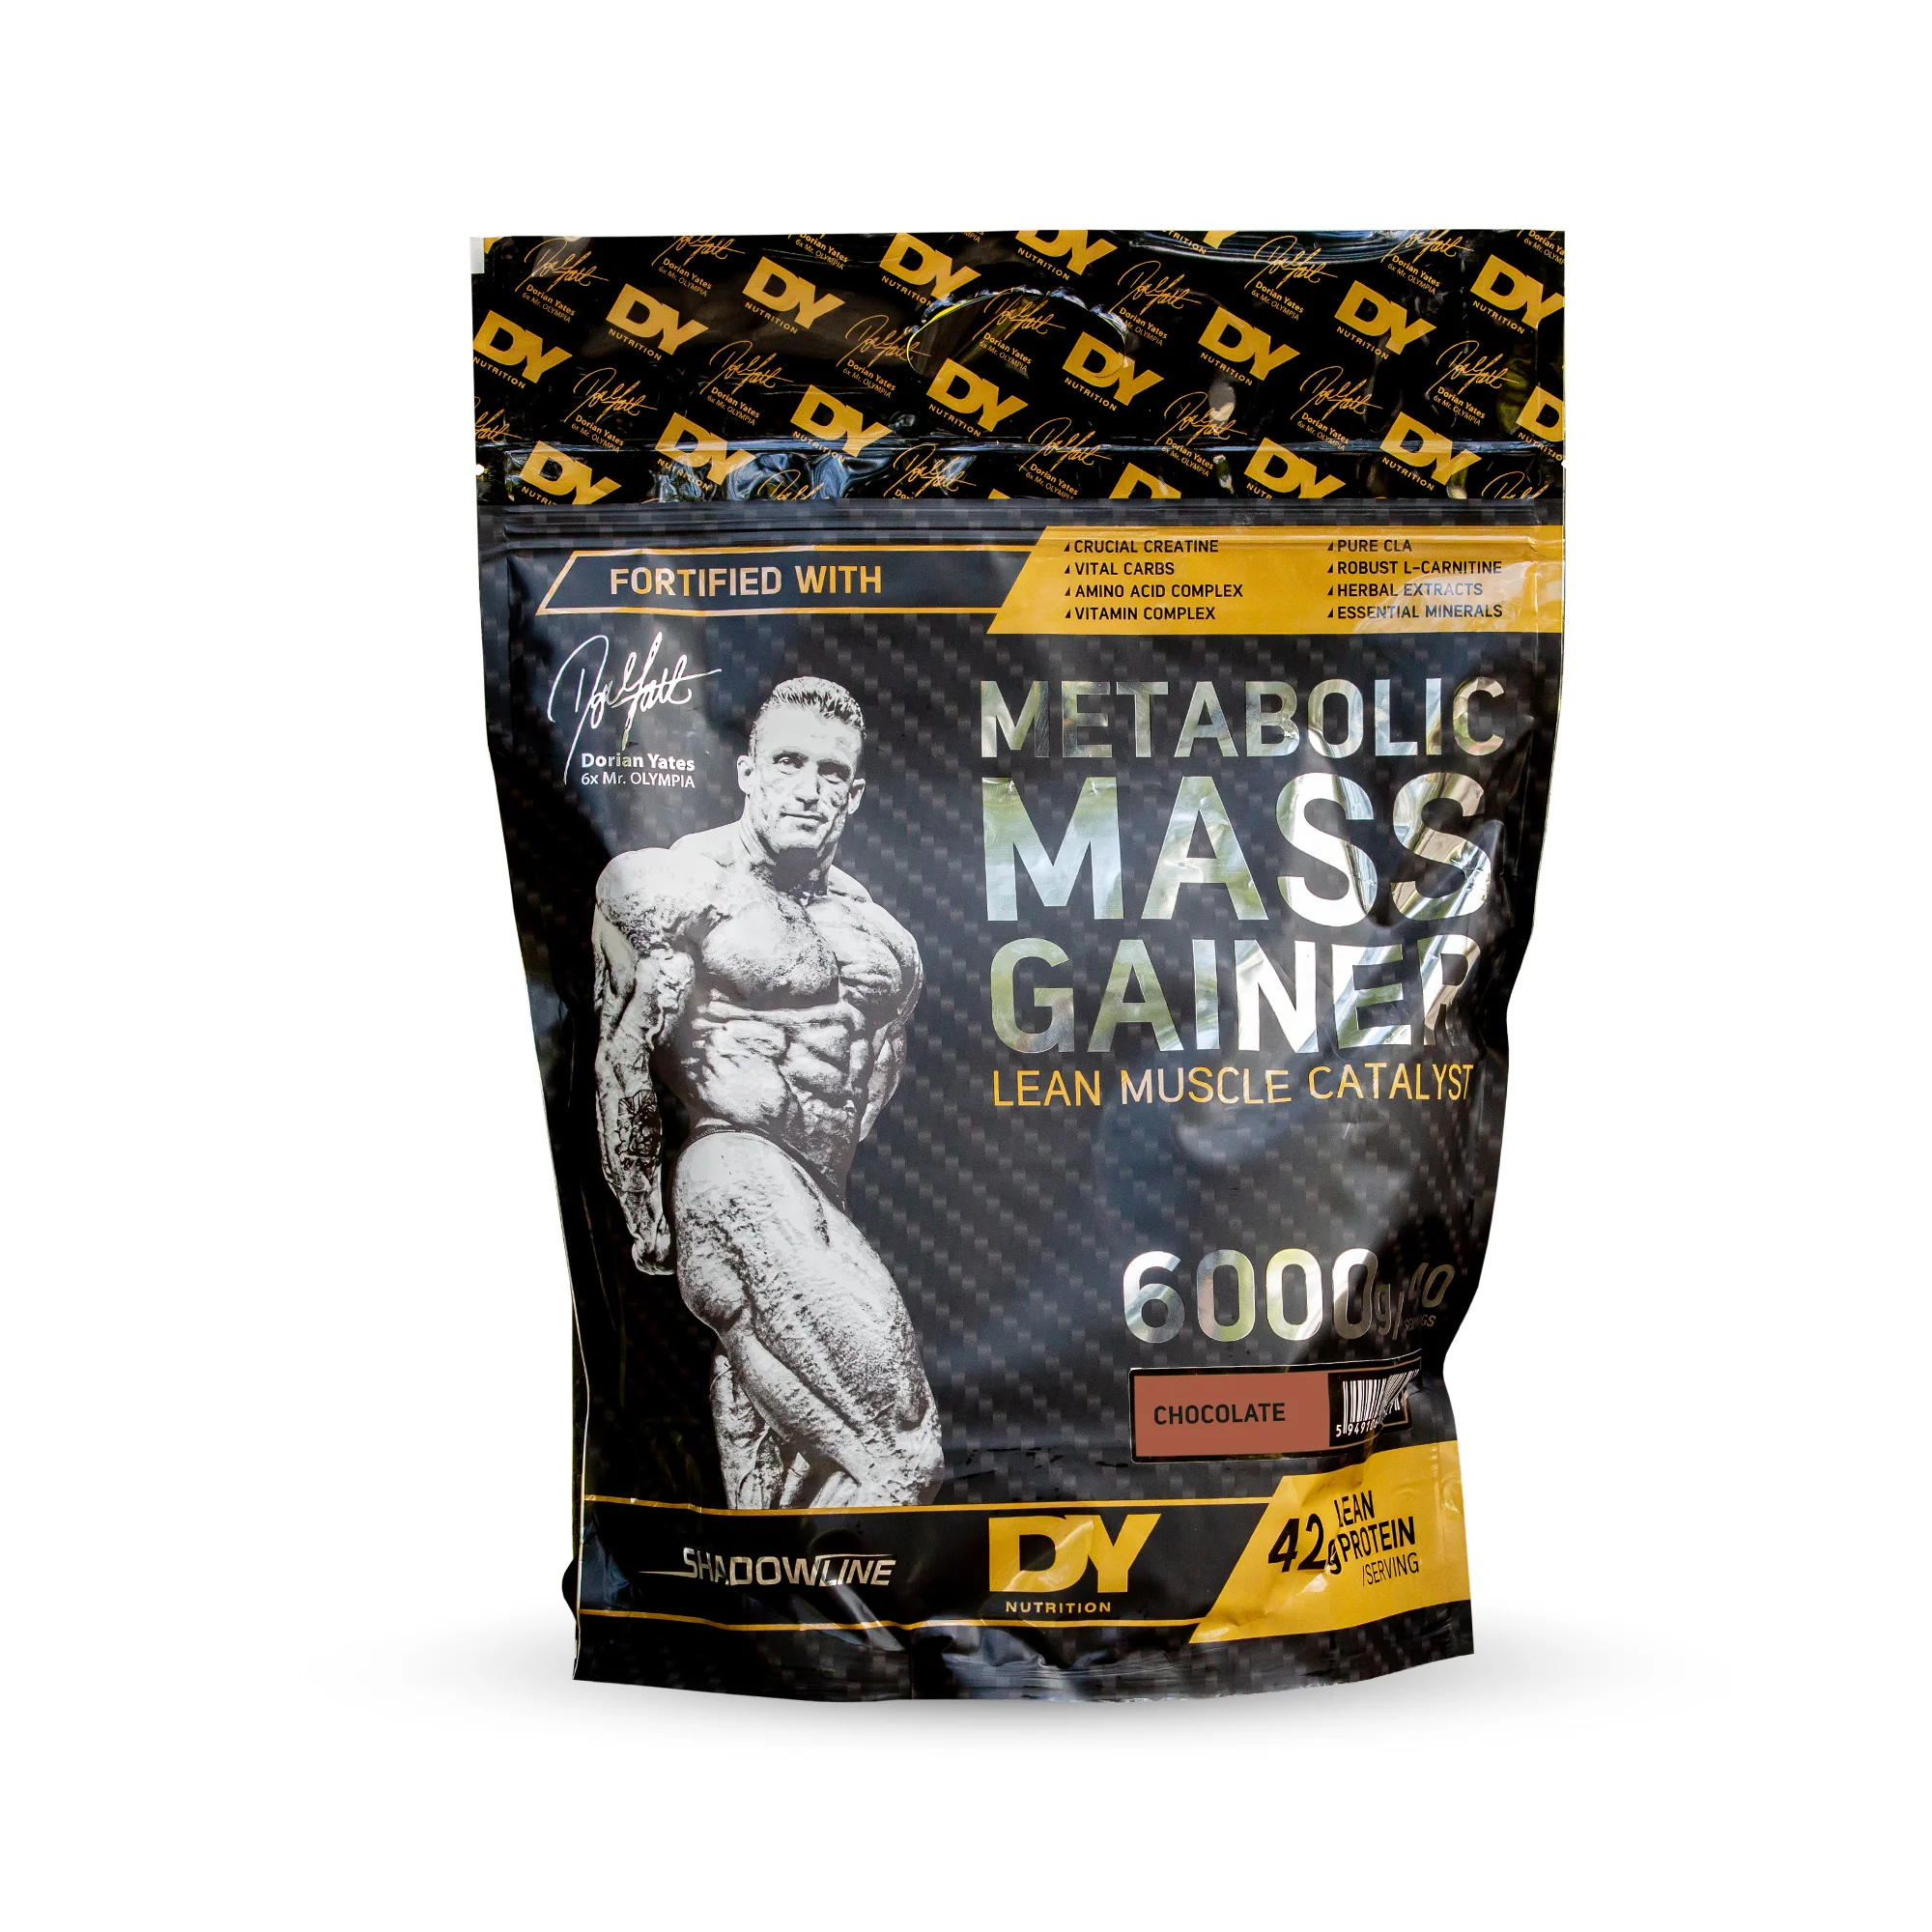 Pachete Promotionale - DY NUTRITION Metabolic Mass Gainer 6kg Cookies Cream, advancednutrition.ro